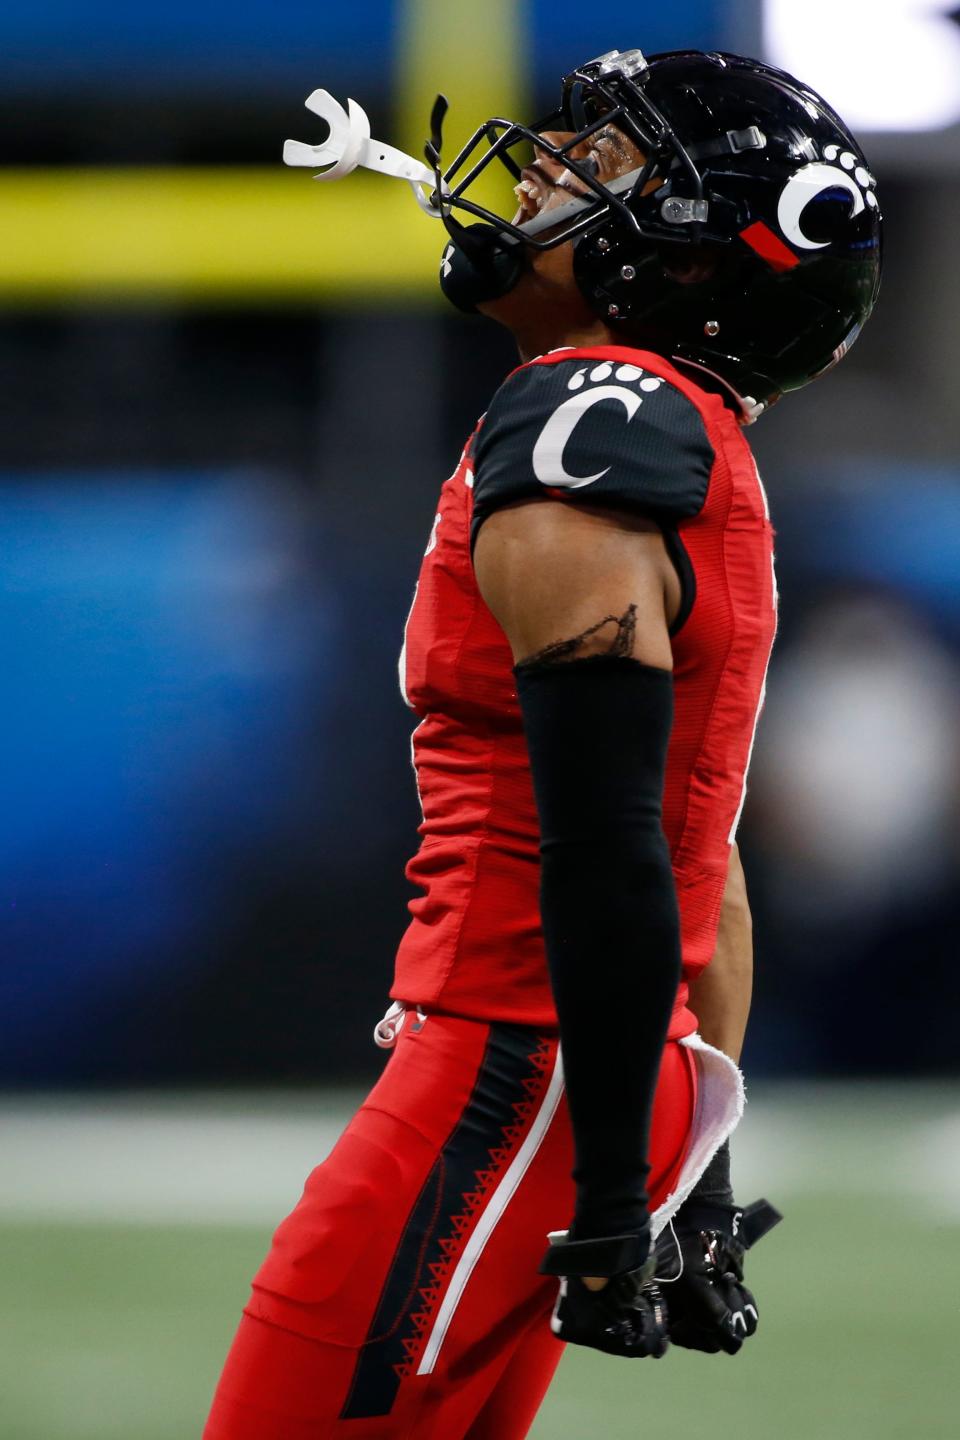 Cincinnati cornerback Coby Bryant celebrates after a turnover during a game this season. Bryant was named the Paycom Jim Thorpe Award winner, which goes to the best defensive back in college football.